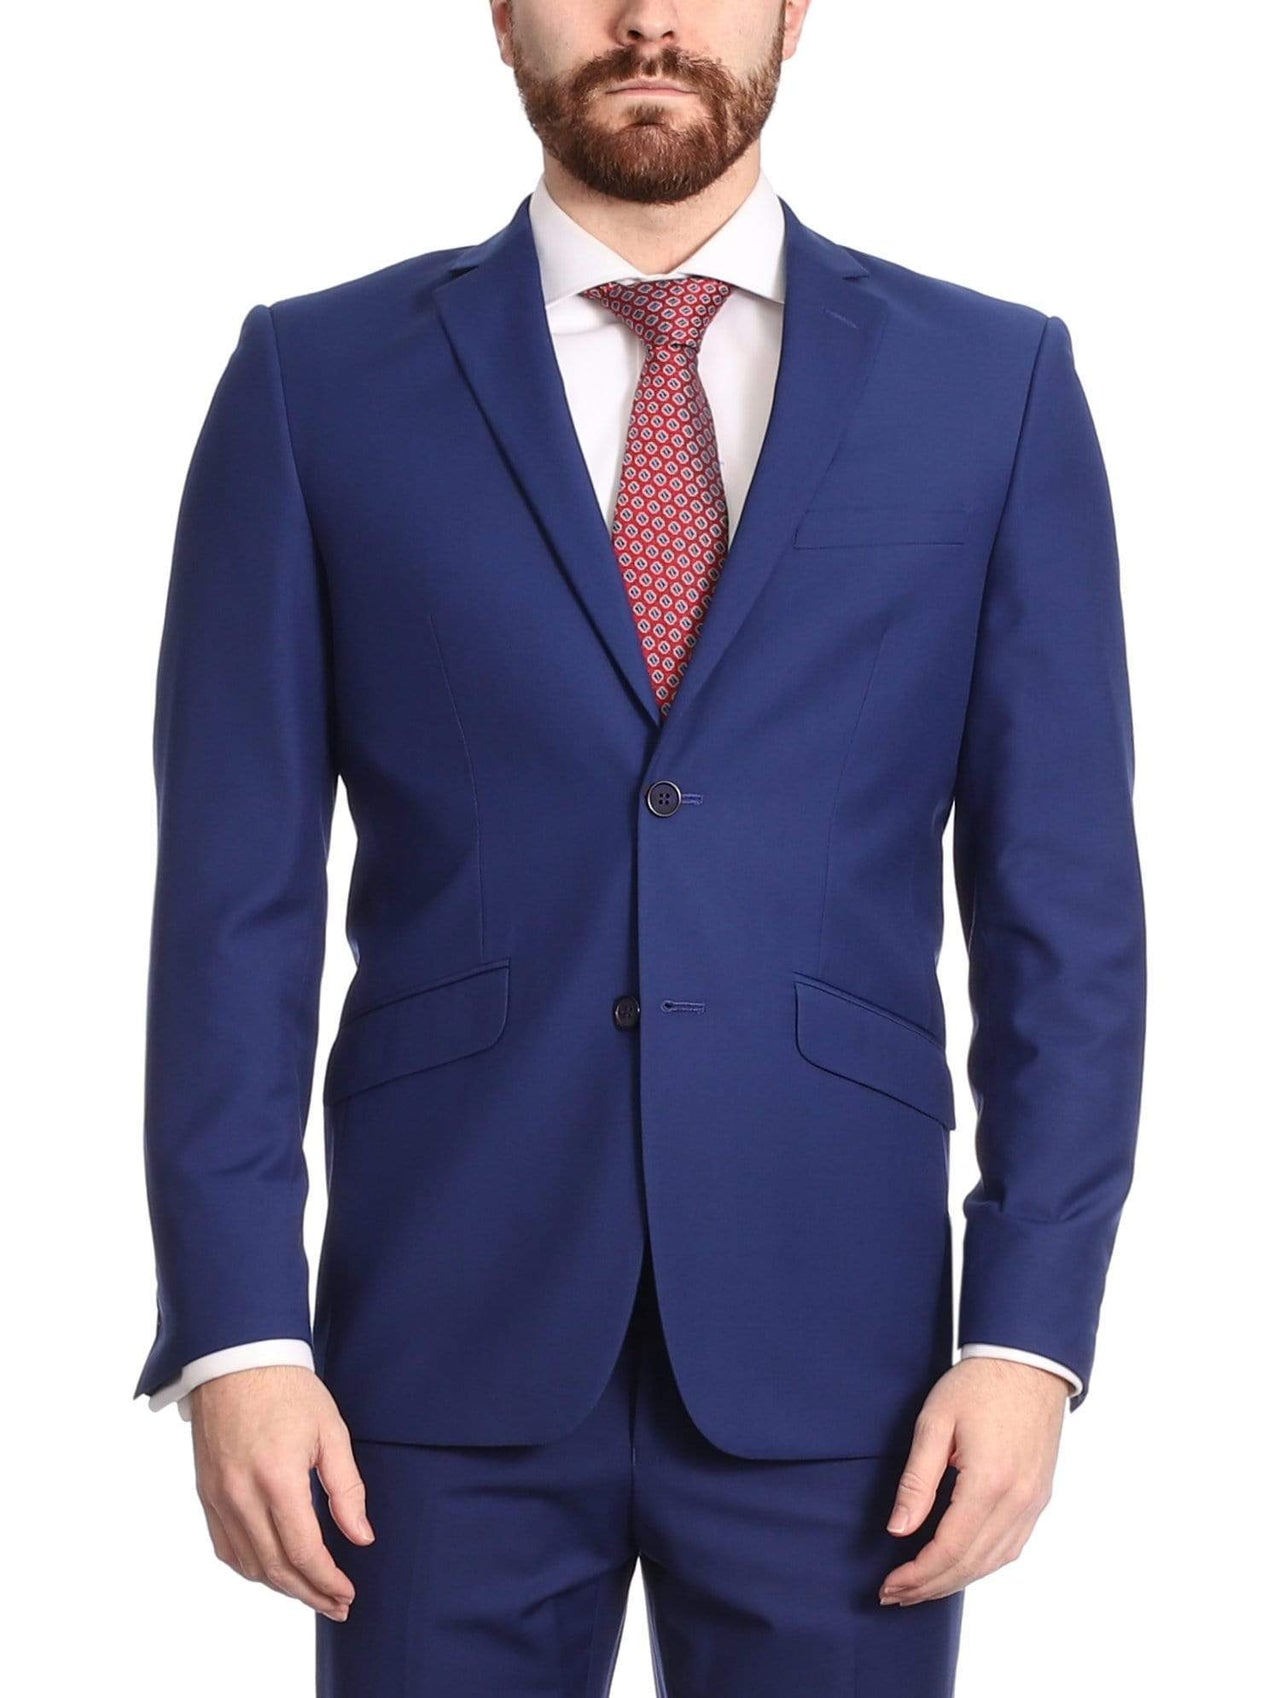 Raphael Bestselling Items Men's Raphael Slim Fit Solid French Medium Blue Two Button 2 Piece Formal Suit